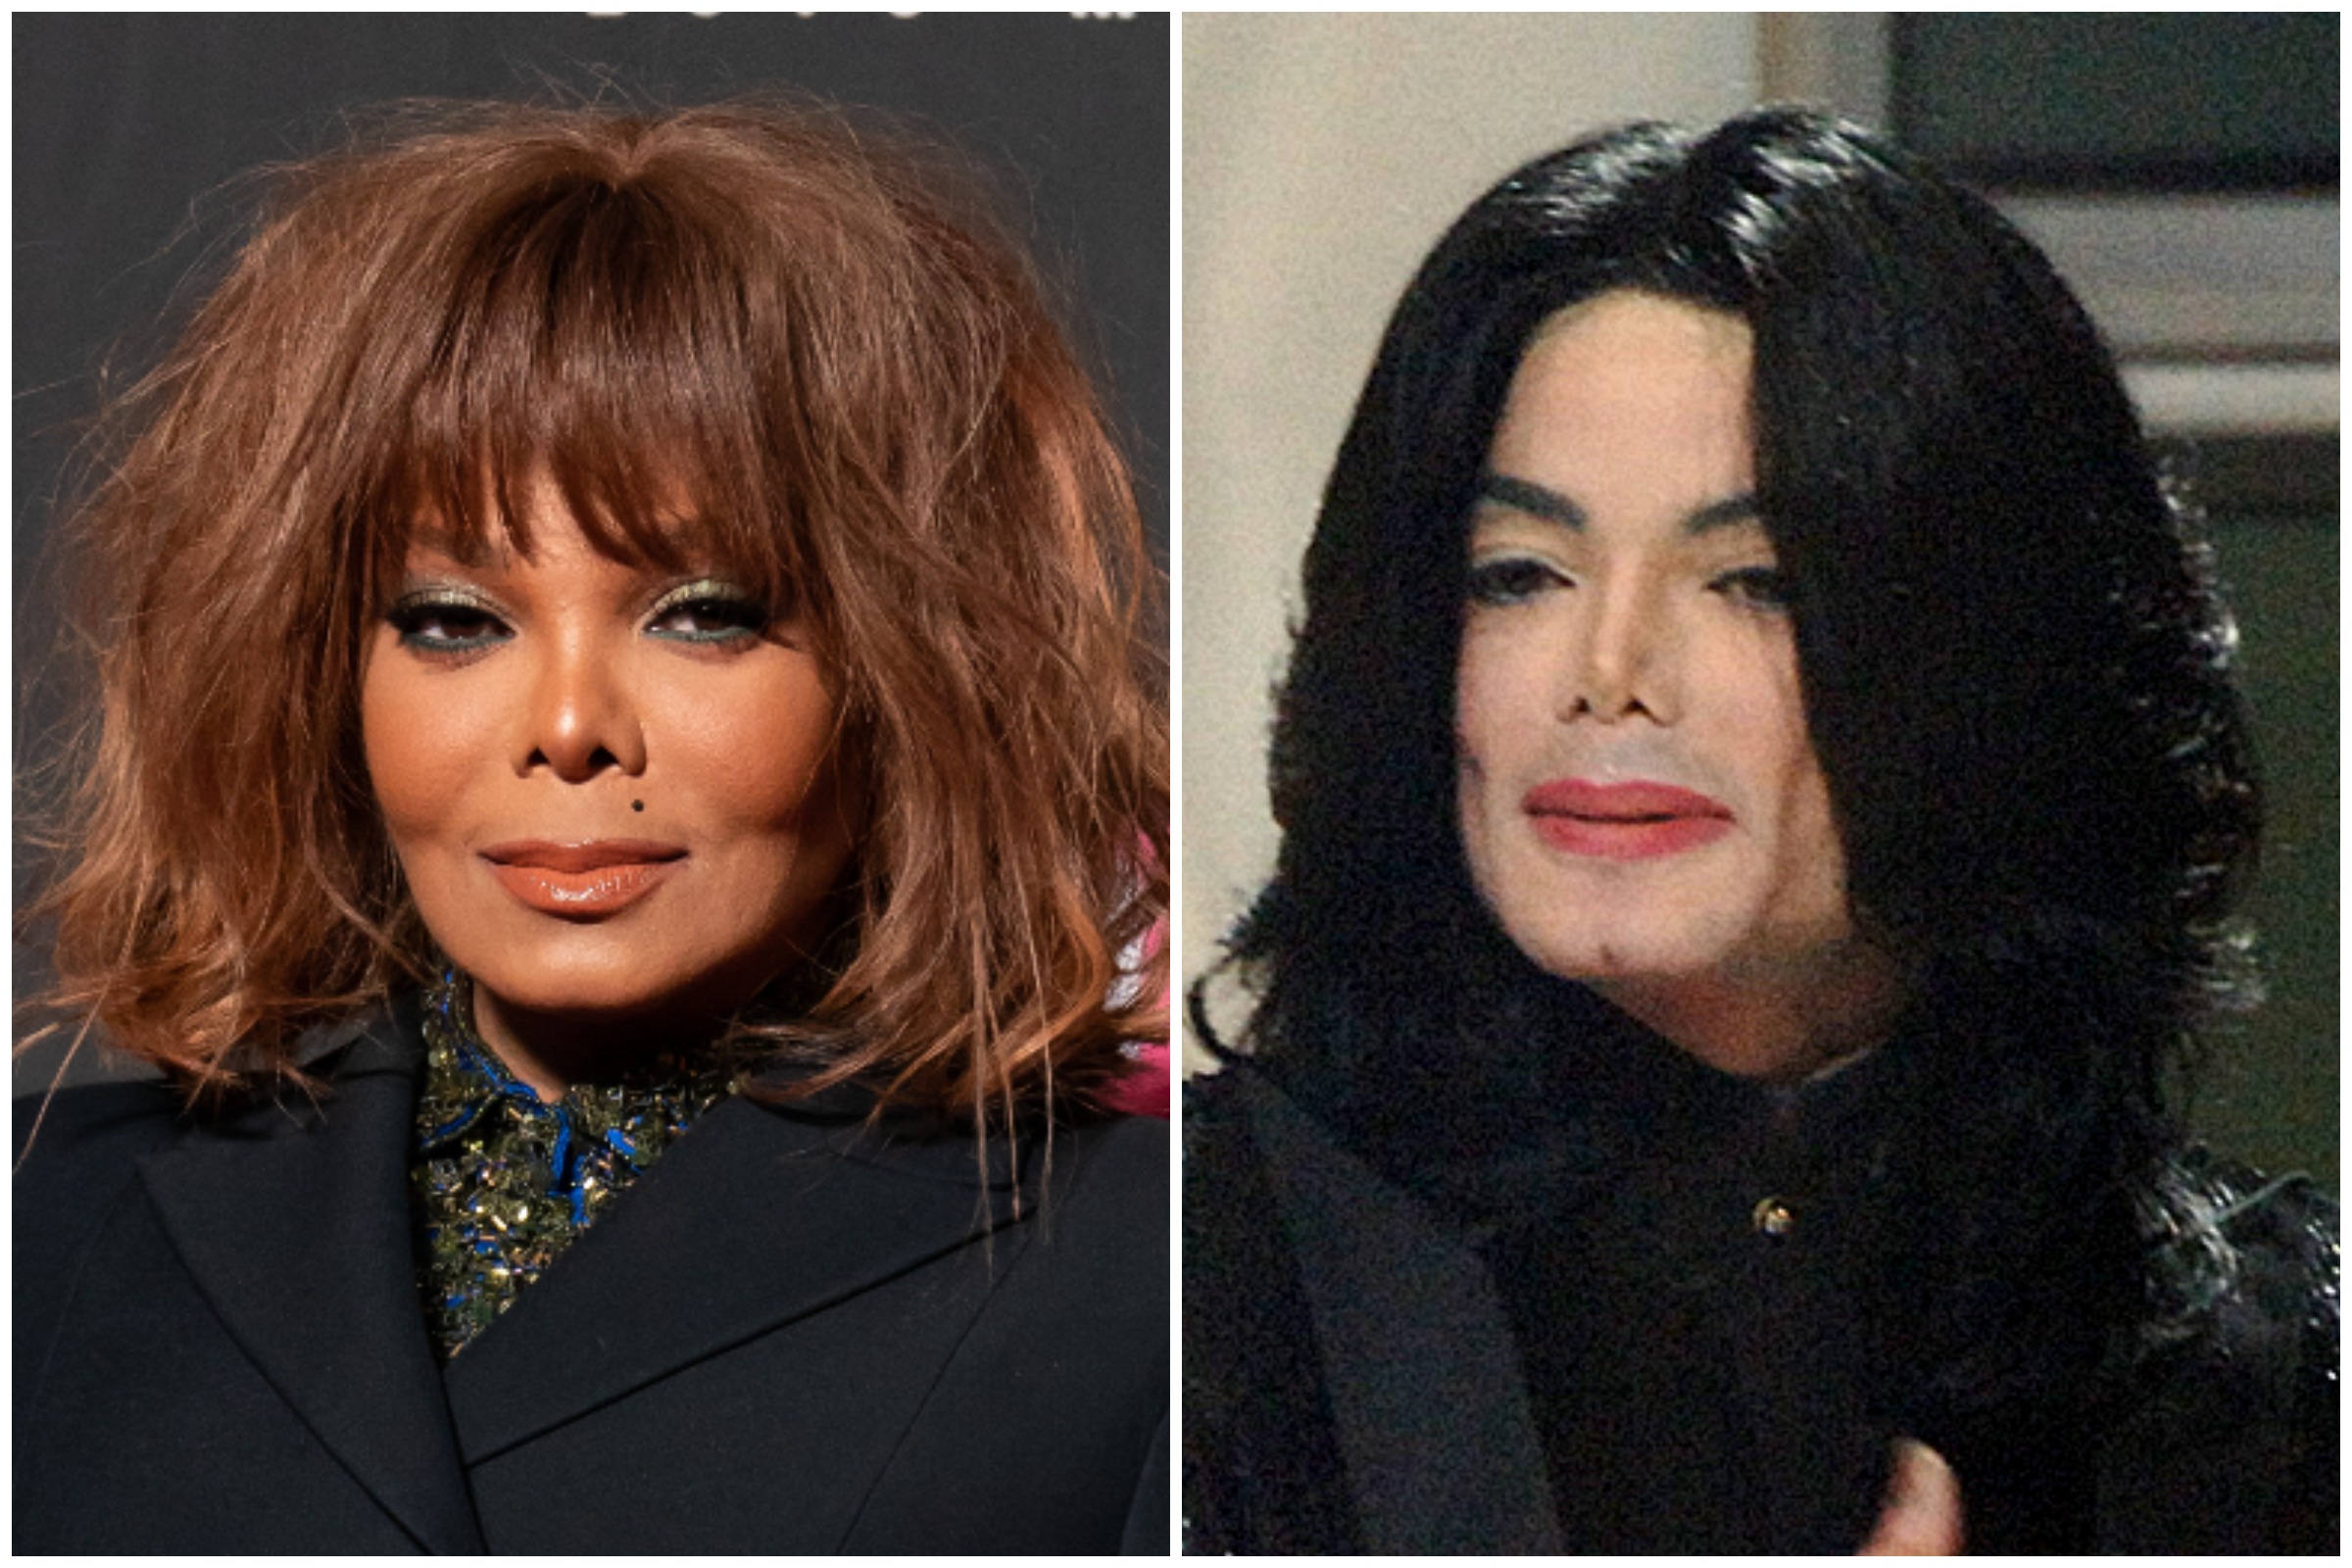 Janet Jackson Says Brother Michael Used To Call Her 'Pig